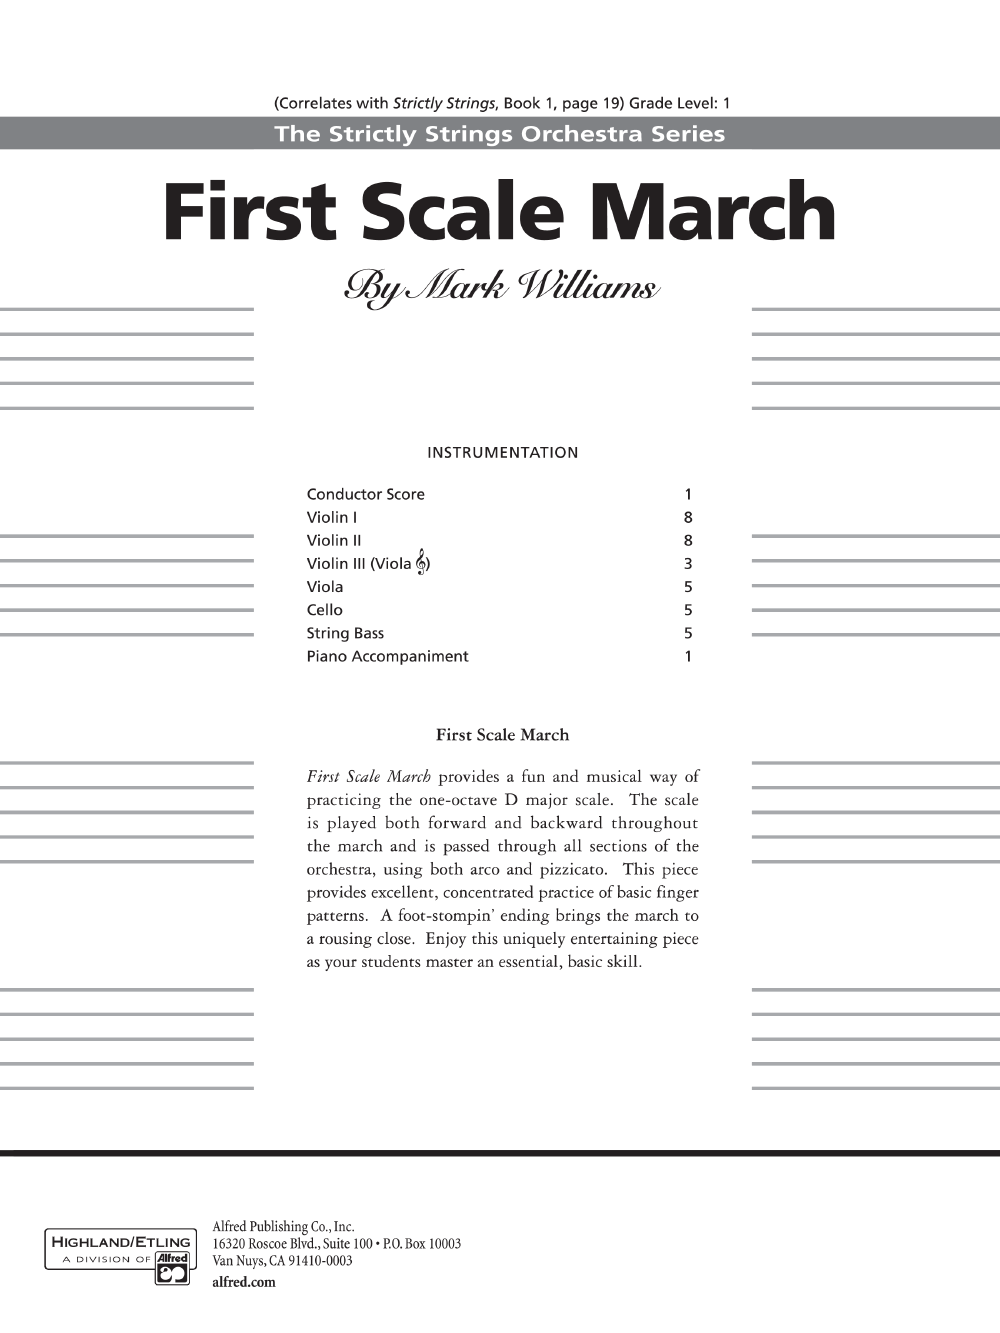 FIRST SCALE MARCH